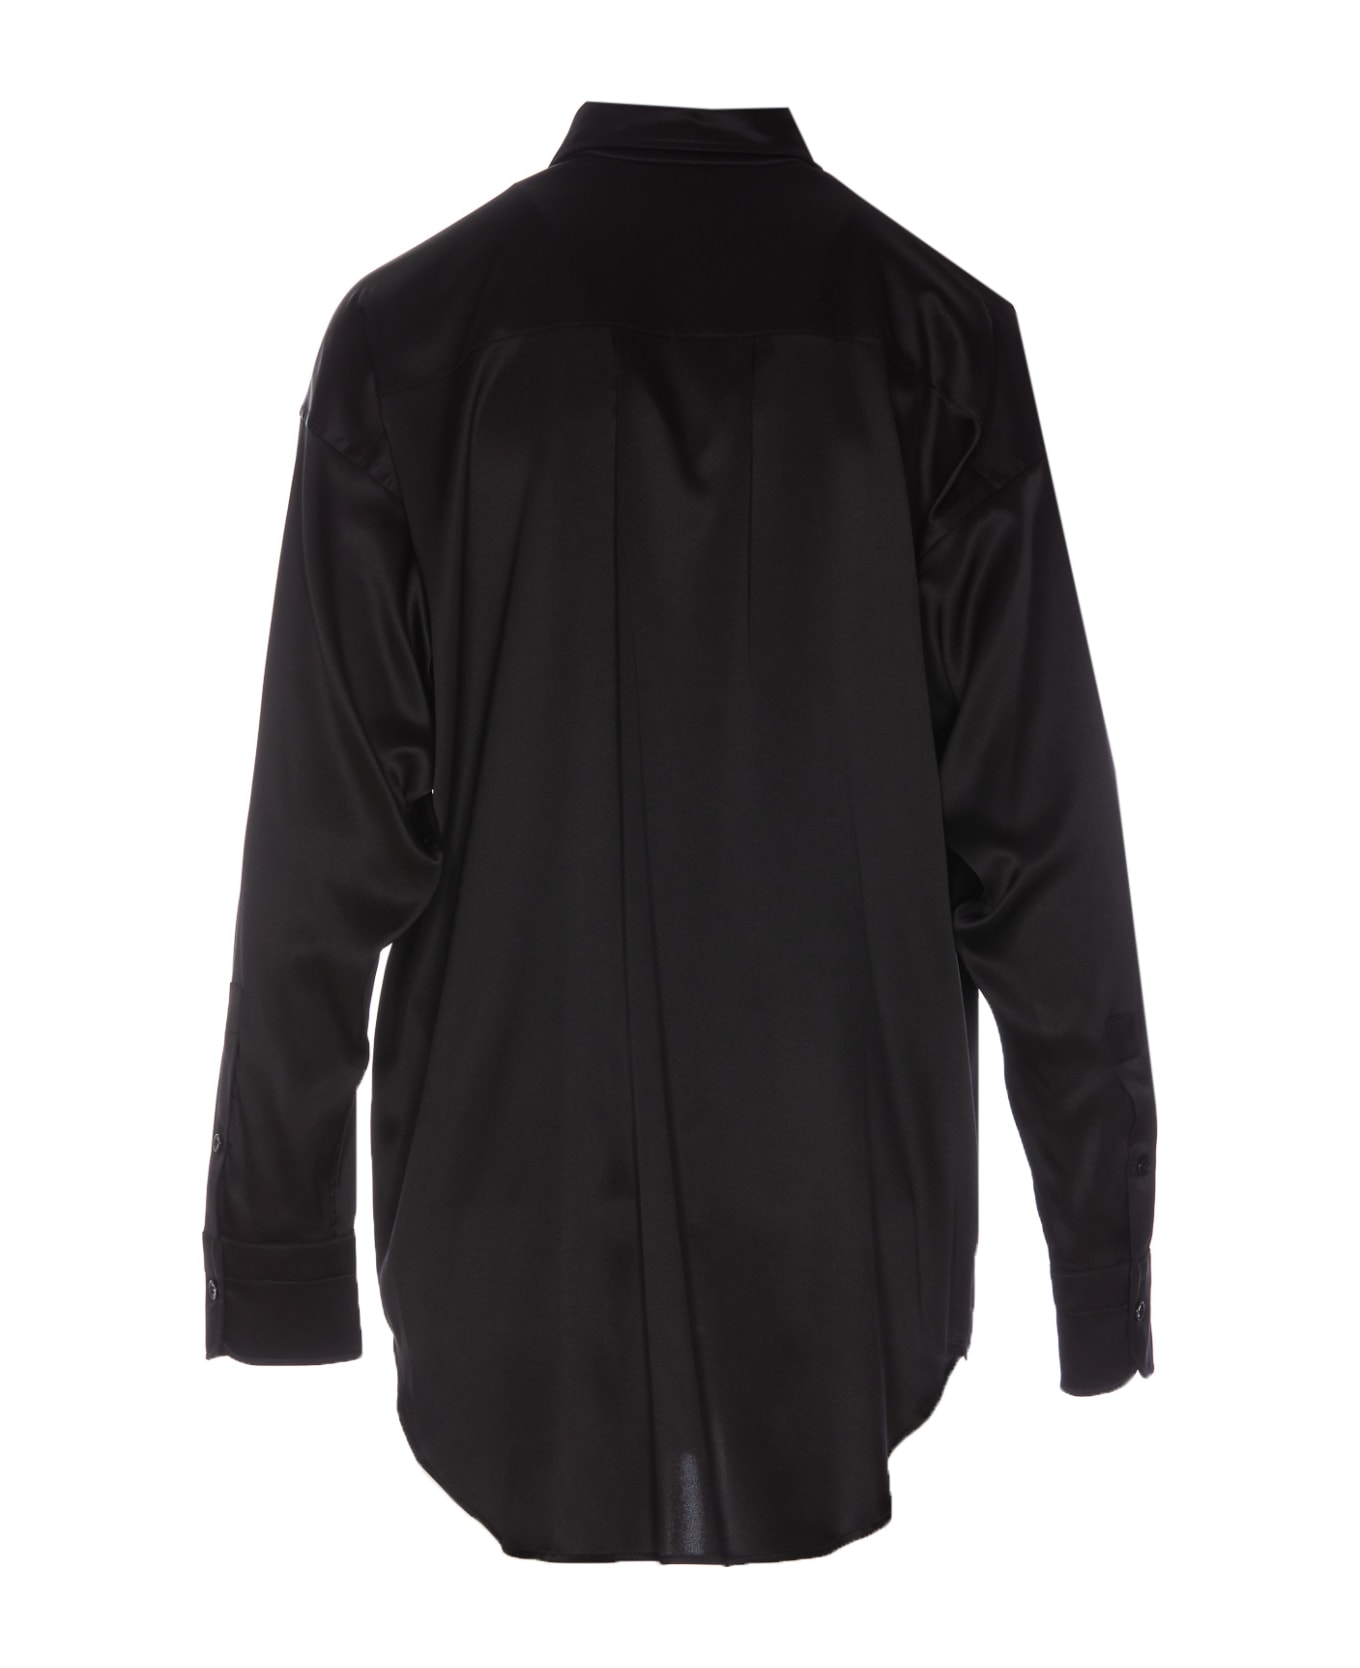 Tom Ford Stretch Silk Satin Relaxed Fit Shirt - Black